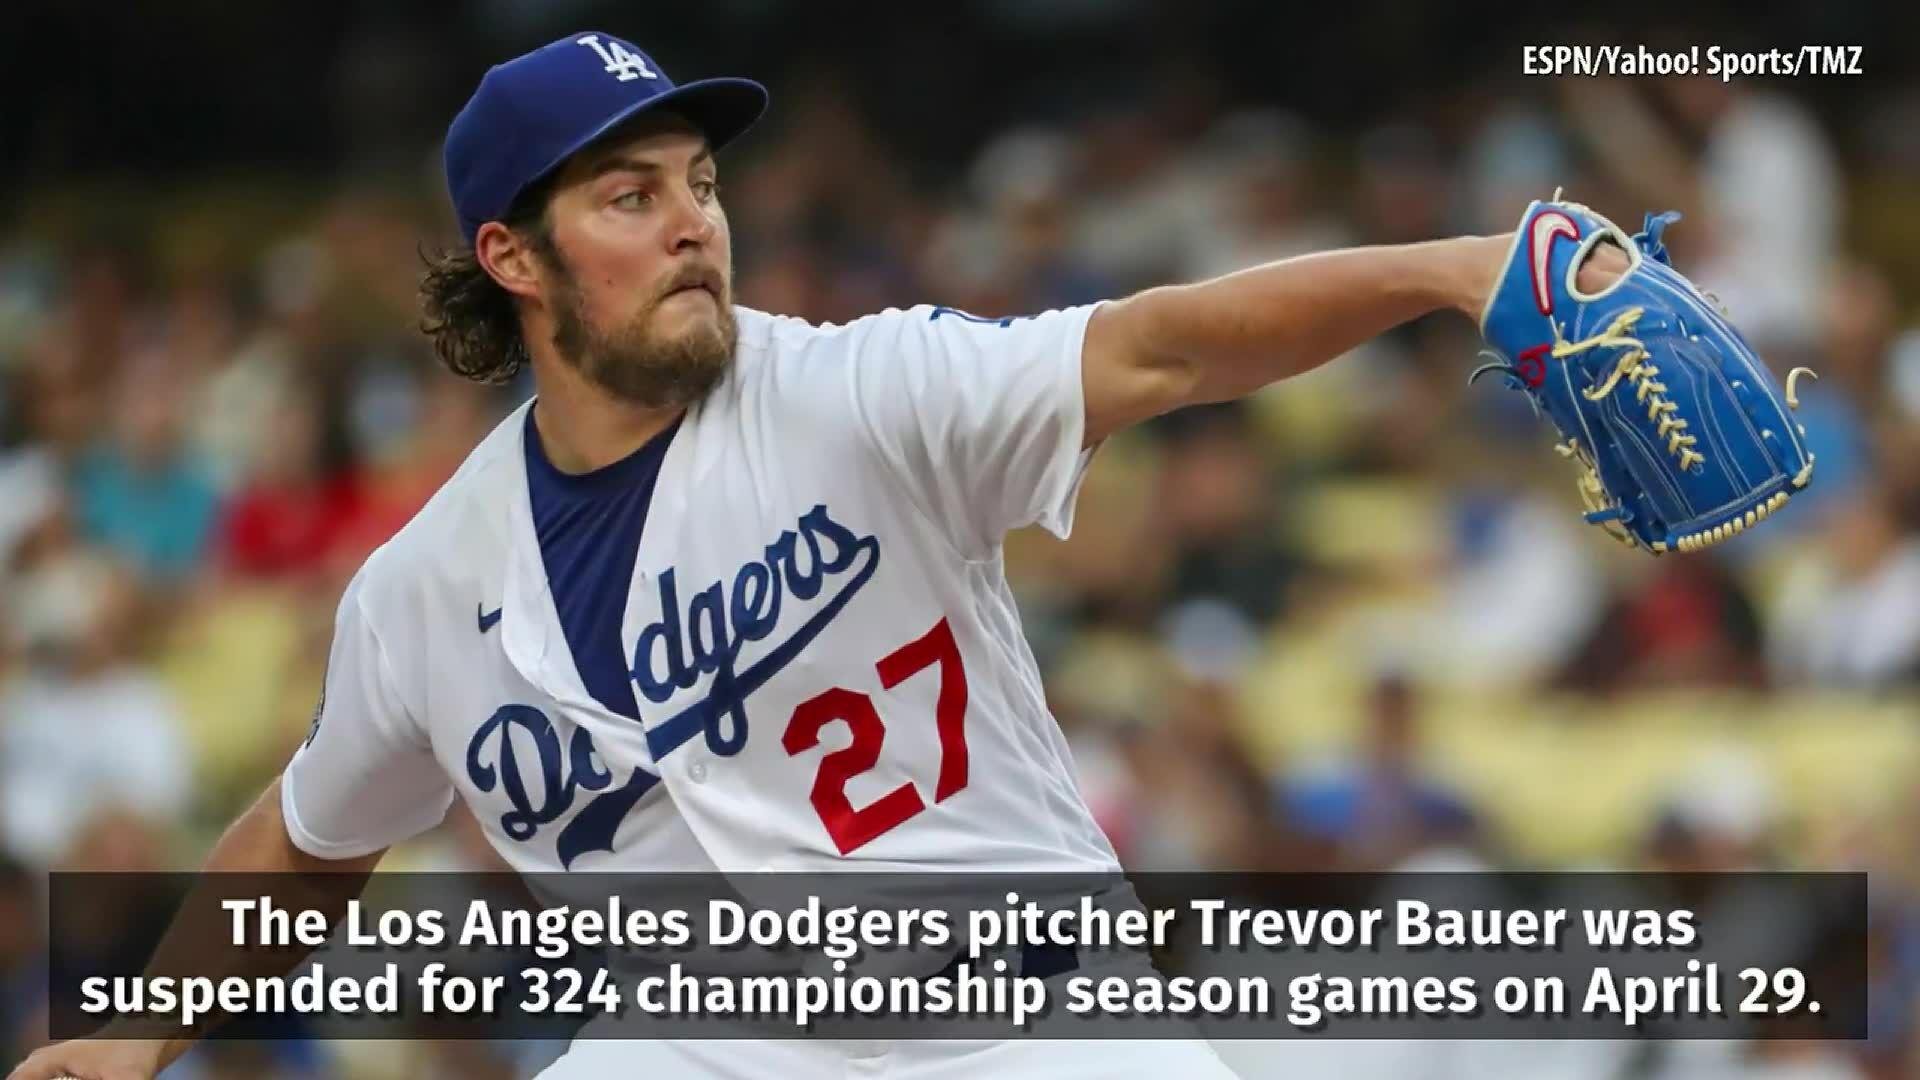 Update] MLB suspends Dodgers pitcher Trevor Bauer for 2 years; 3rd